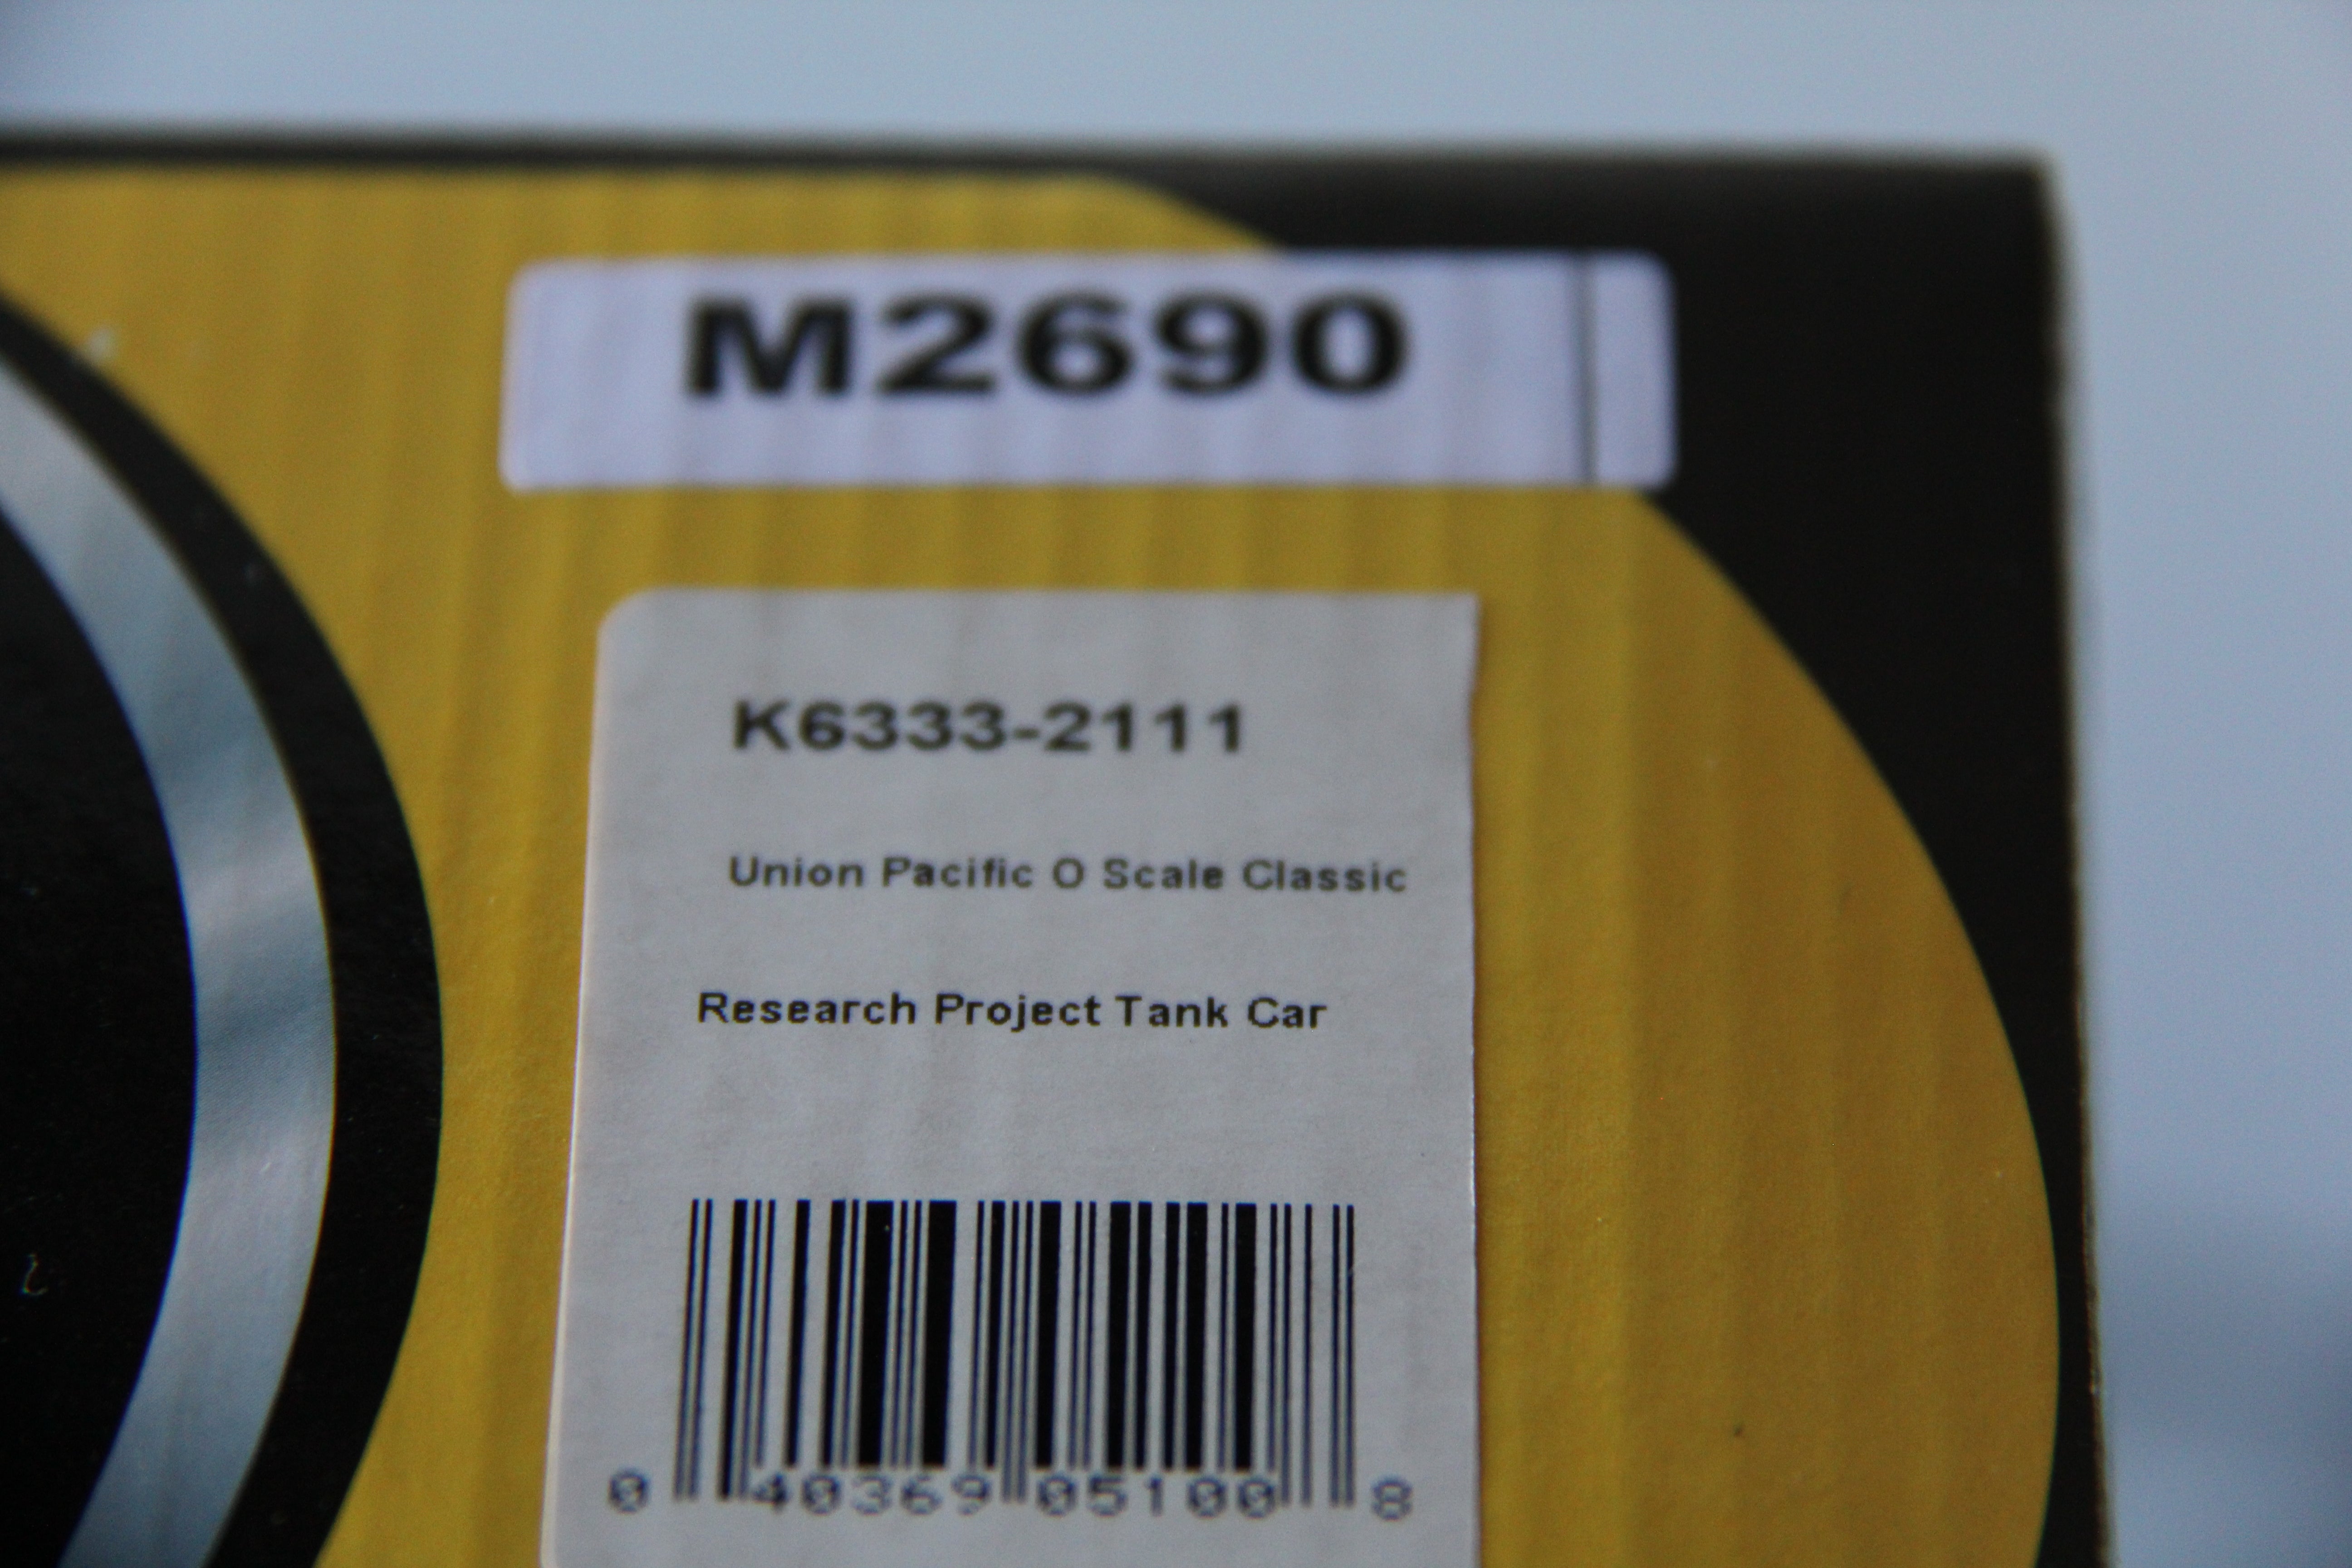 K-Line K6333-2111 Union Pacific Classic Research Project Tank Car-Second hand-M2690